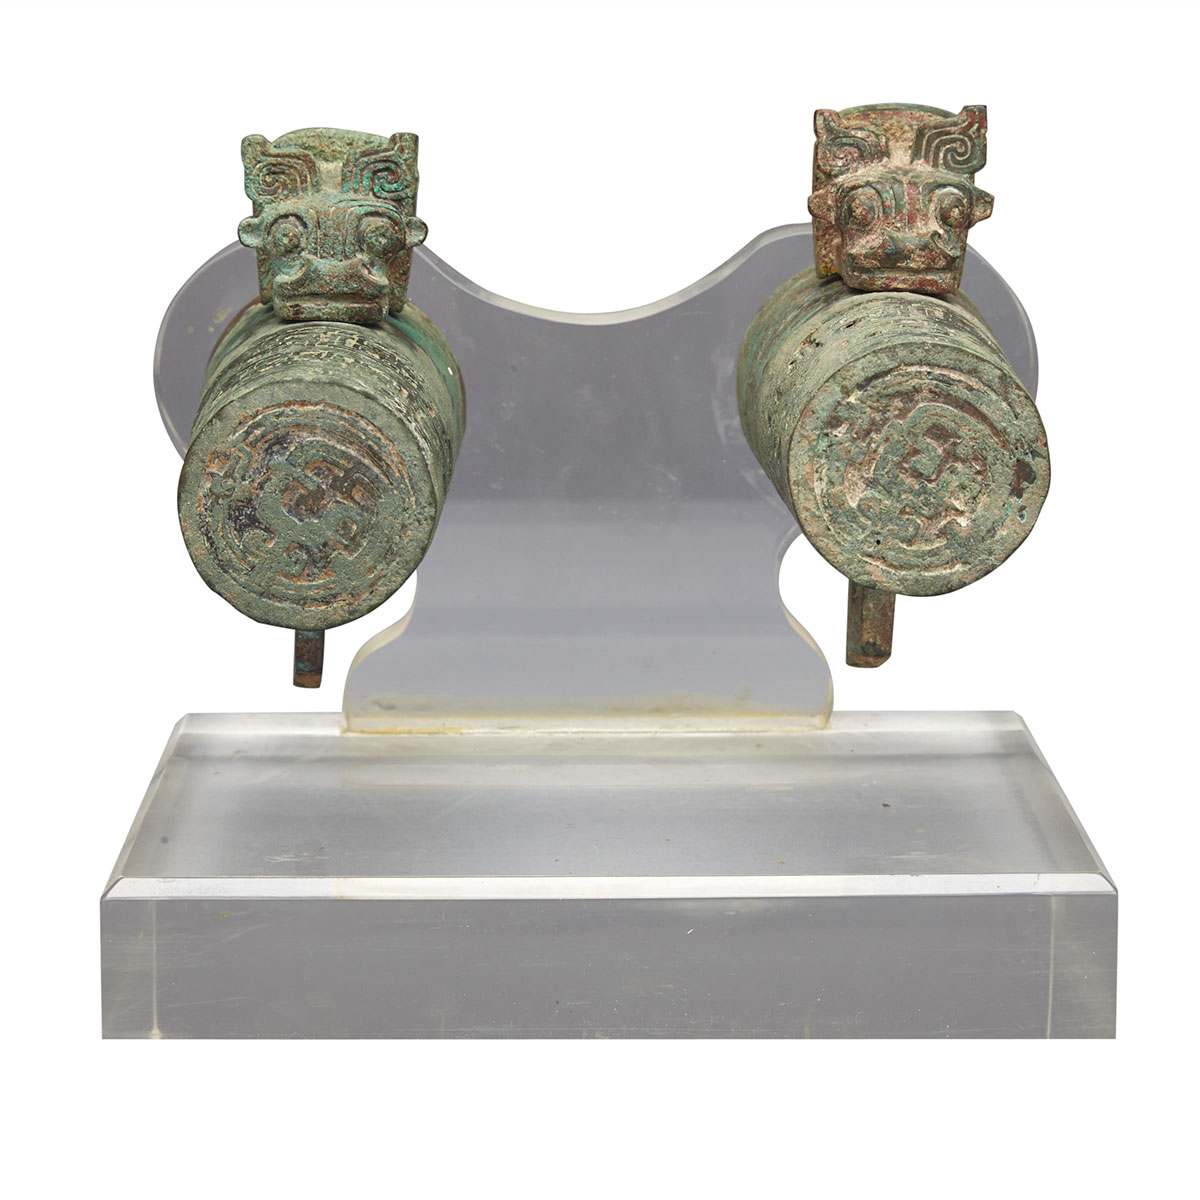 Pair of Bronze Chariot Axle Caps and Pins, Western Zhou Dynasty, 11th to 8th Century BC